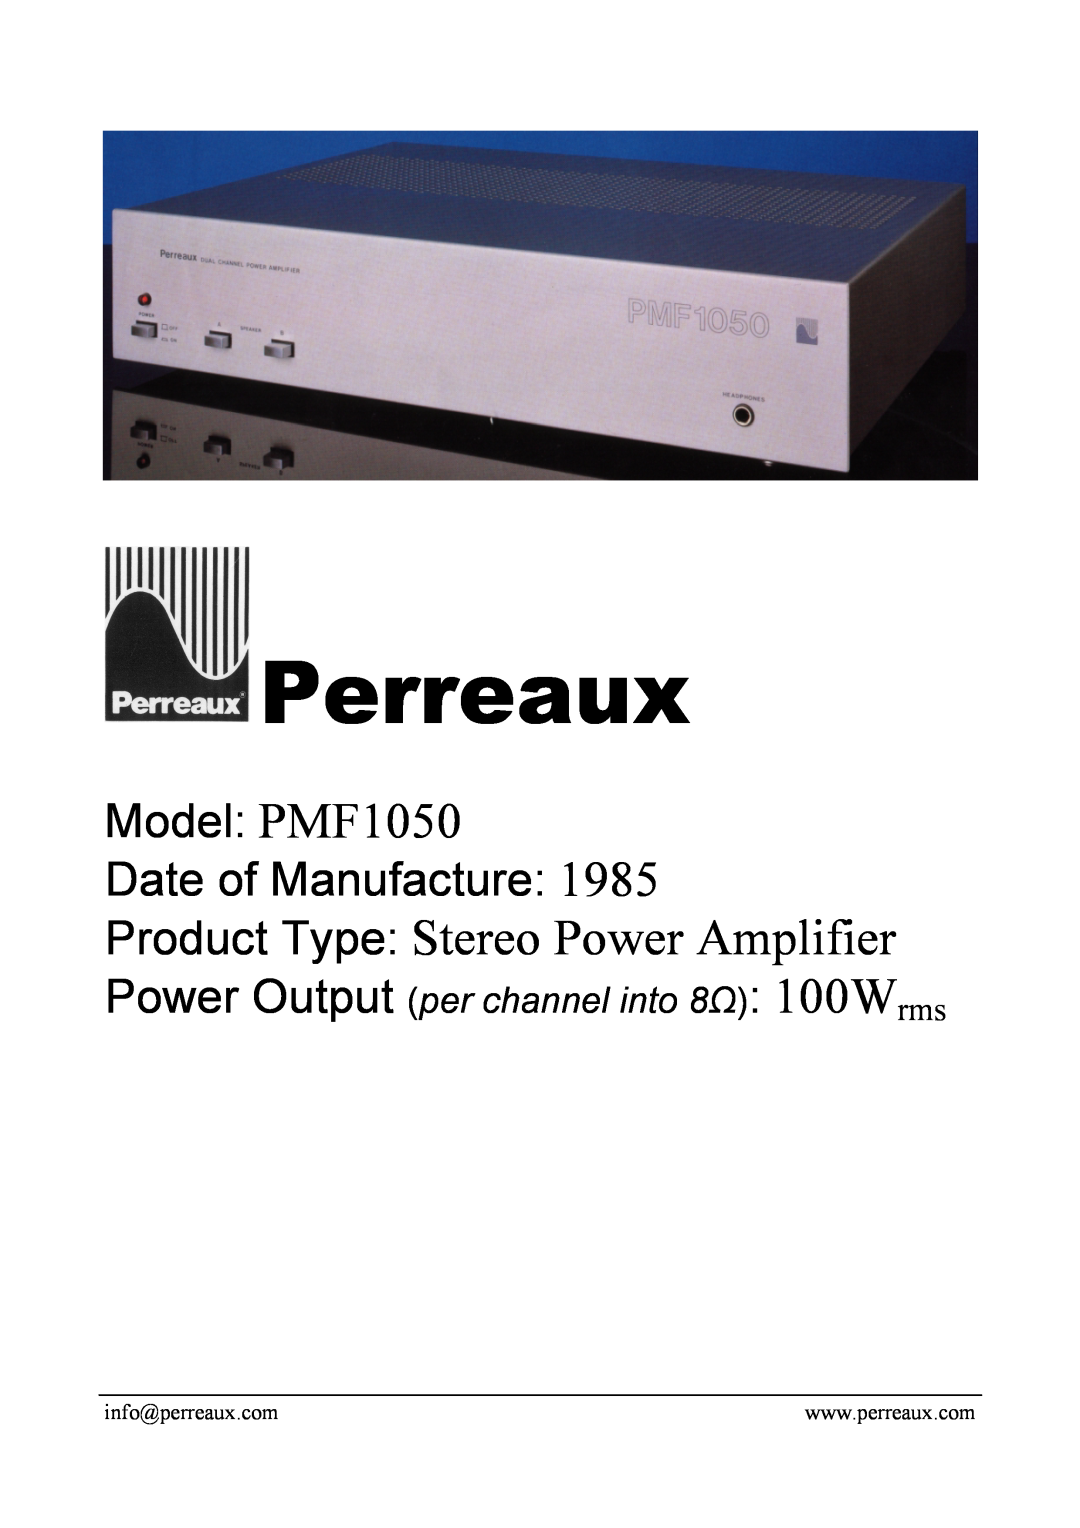 Perreaux manual Perreaux, Product Type Stereo Power Amplifier, Model PMF1050 Date of Manufacture 